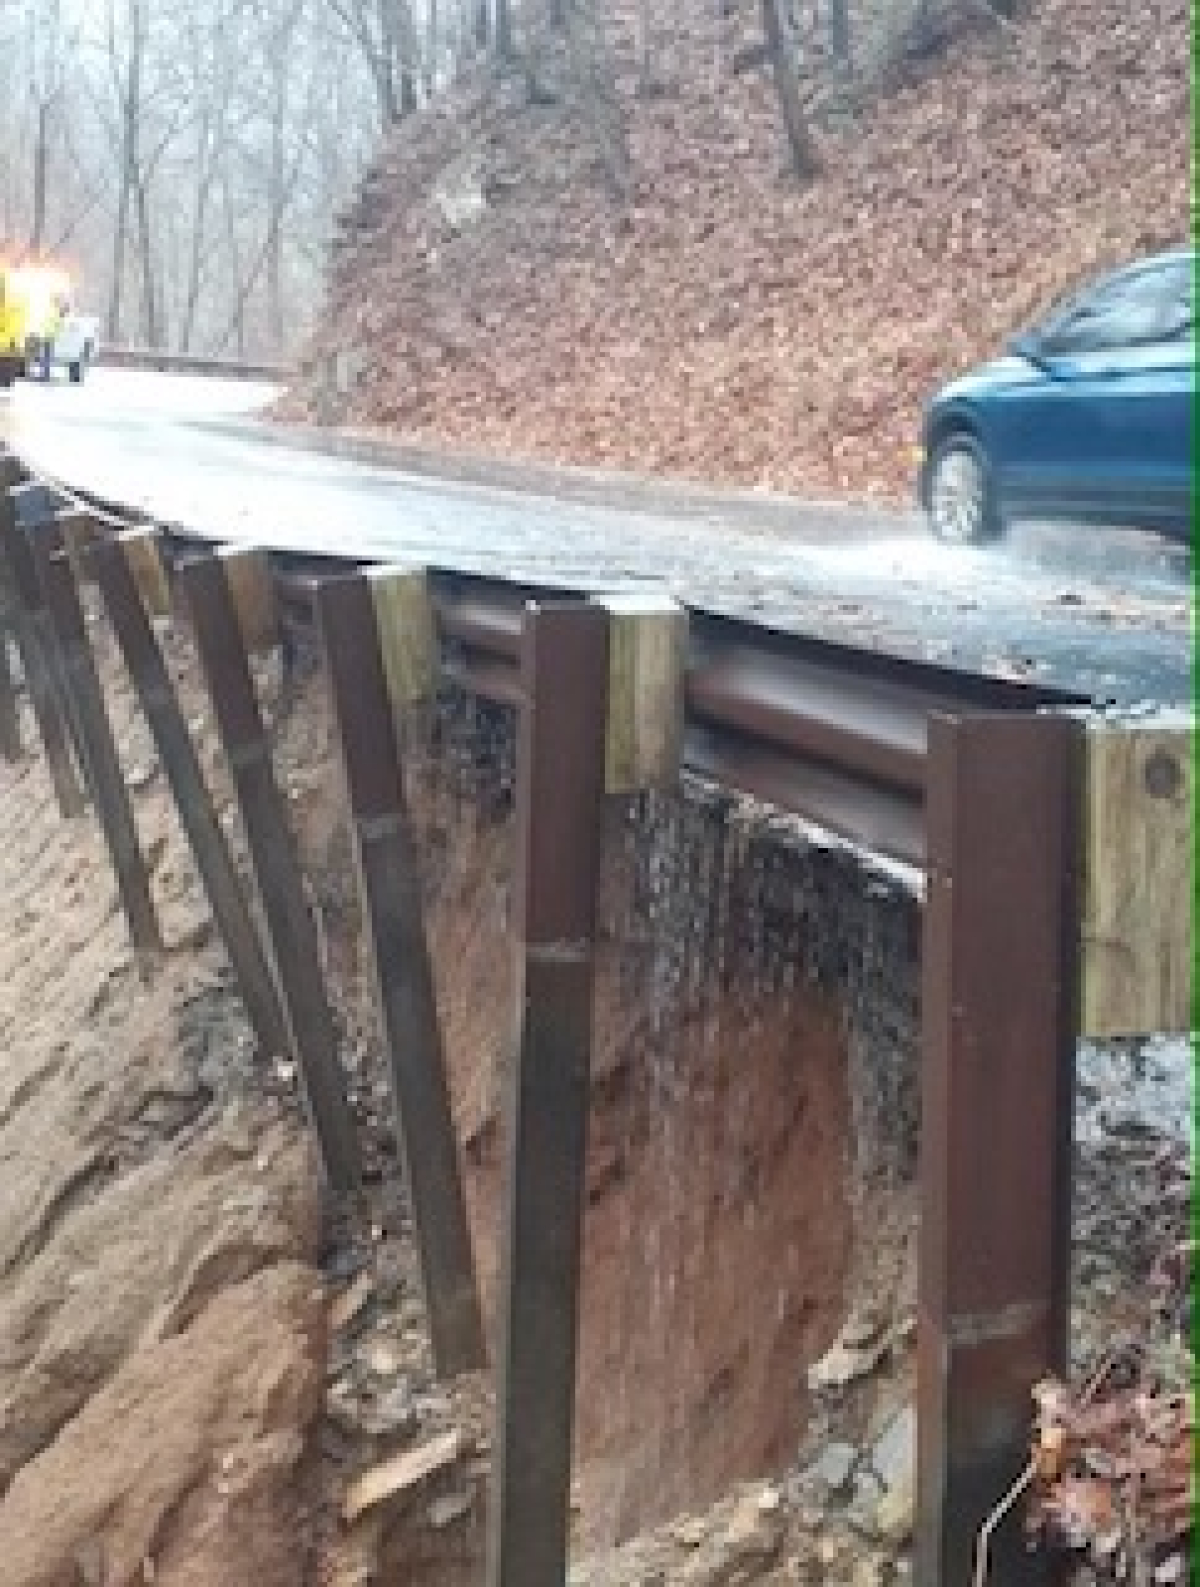 A contractor will repair U.S. 64 on this stretch in the Cullasaja Gorge damaged by storms